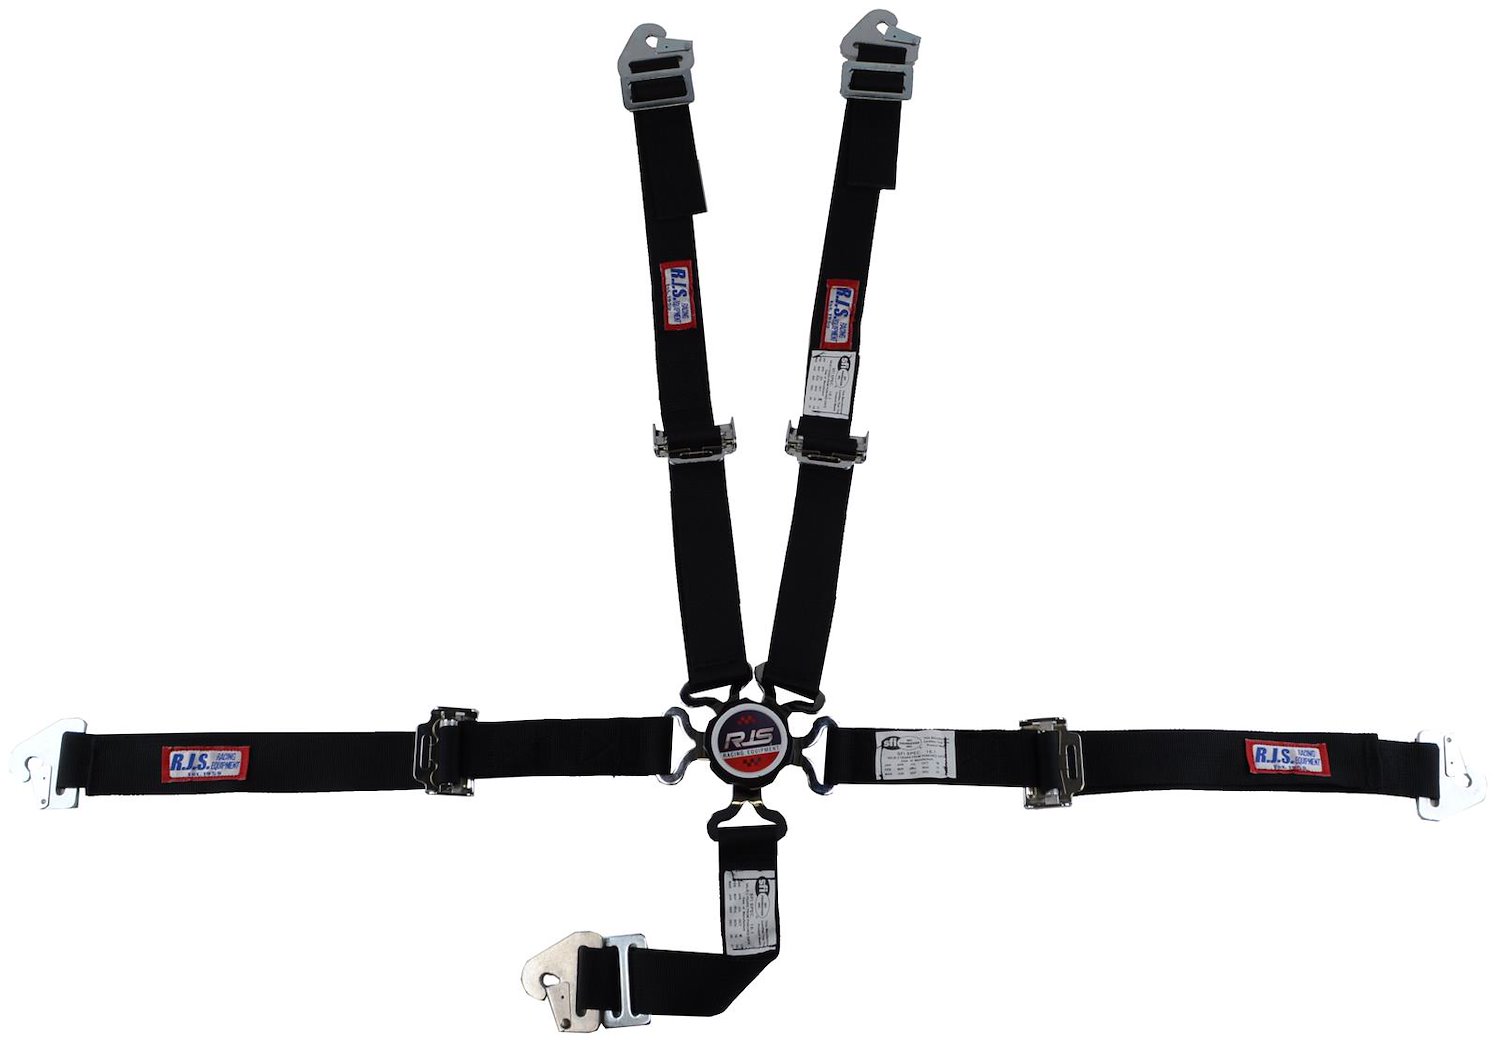 SFI 16.1 CAM-LOCK HARNESS 2 PULL UP Lap Belt 2 Shoulder Harness Individual ROLL BAR Mount 2 DOUBLE Sub ALL WRAP/BOLT ENDS BLUE